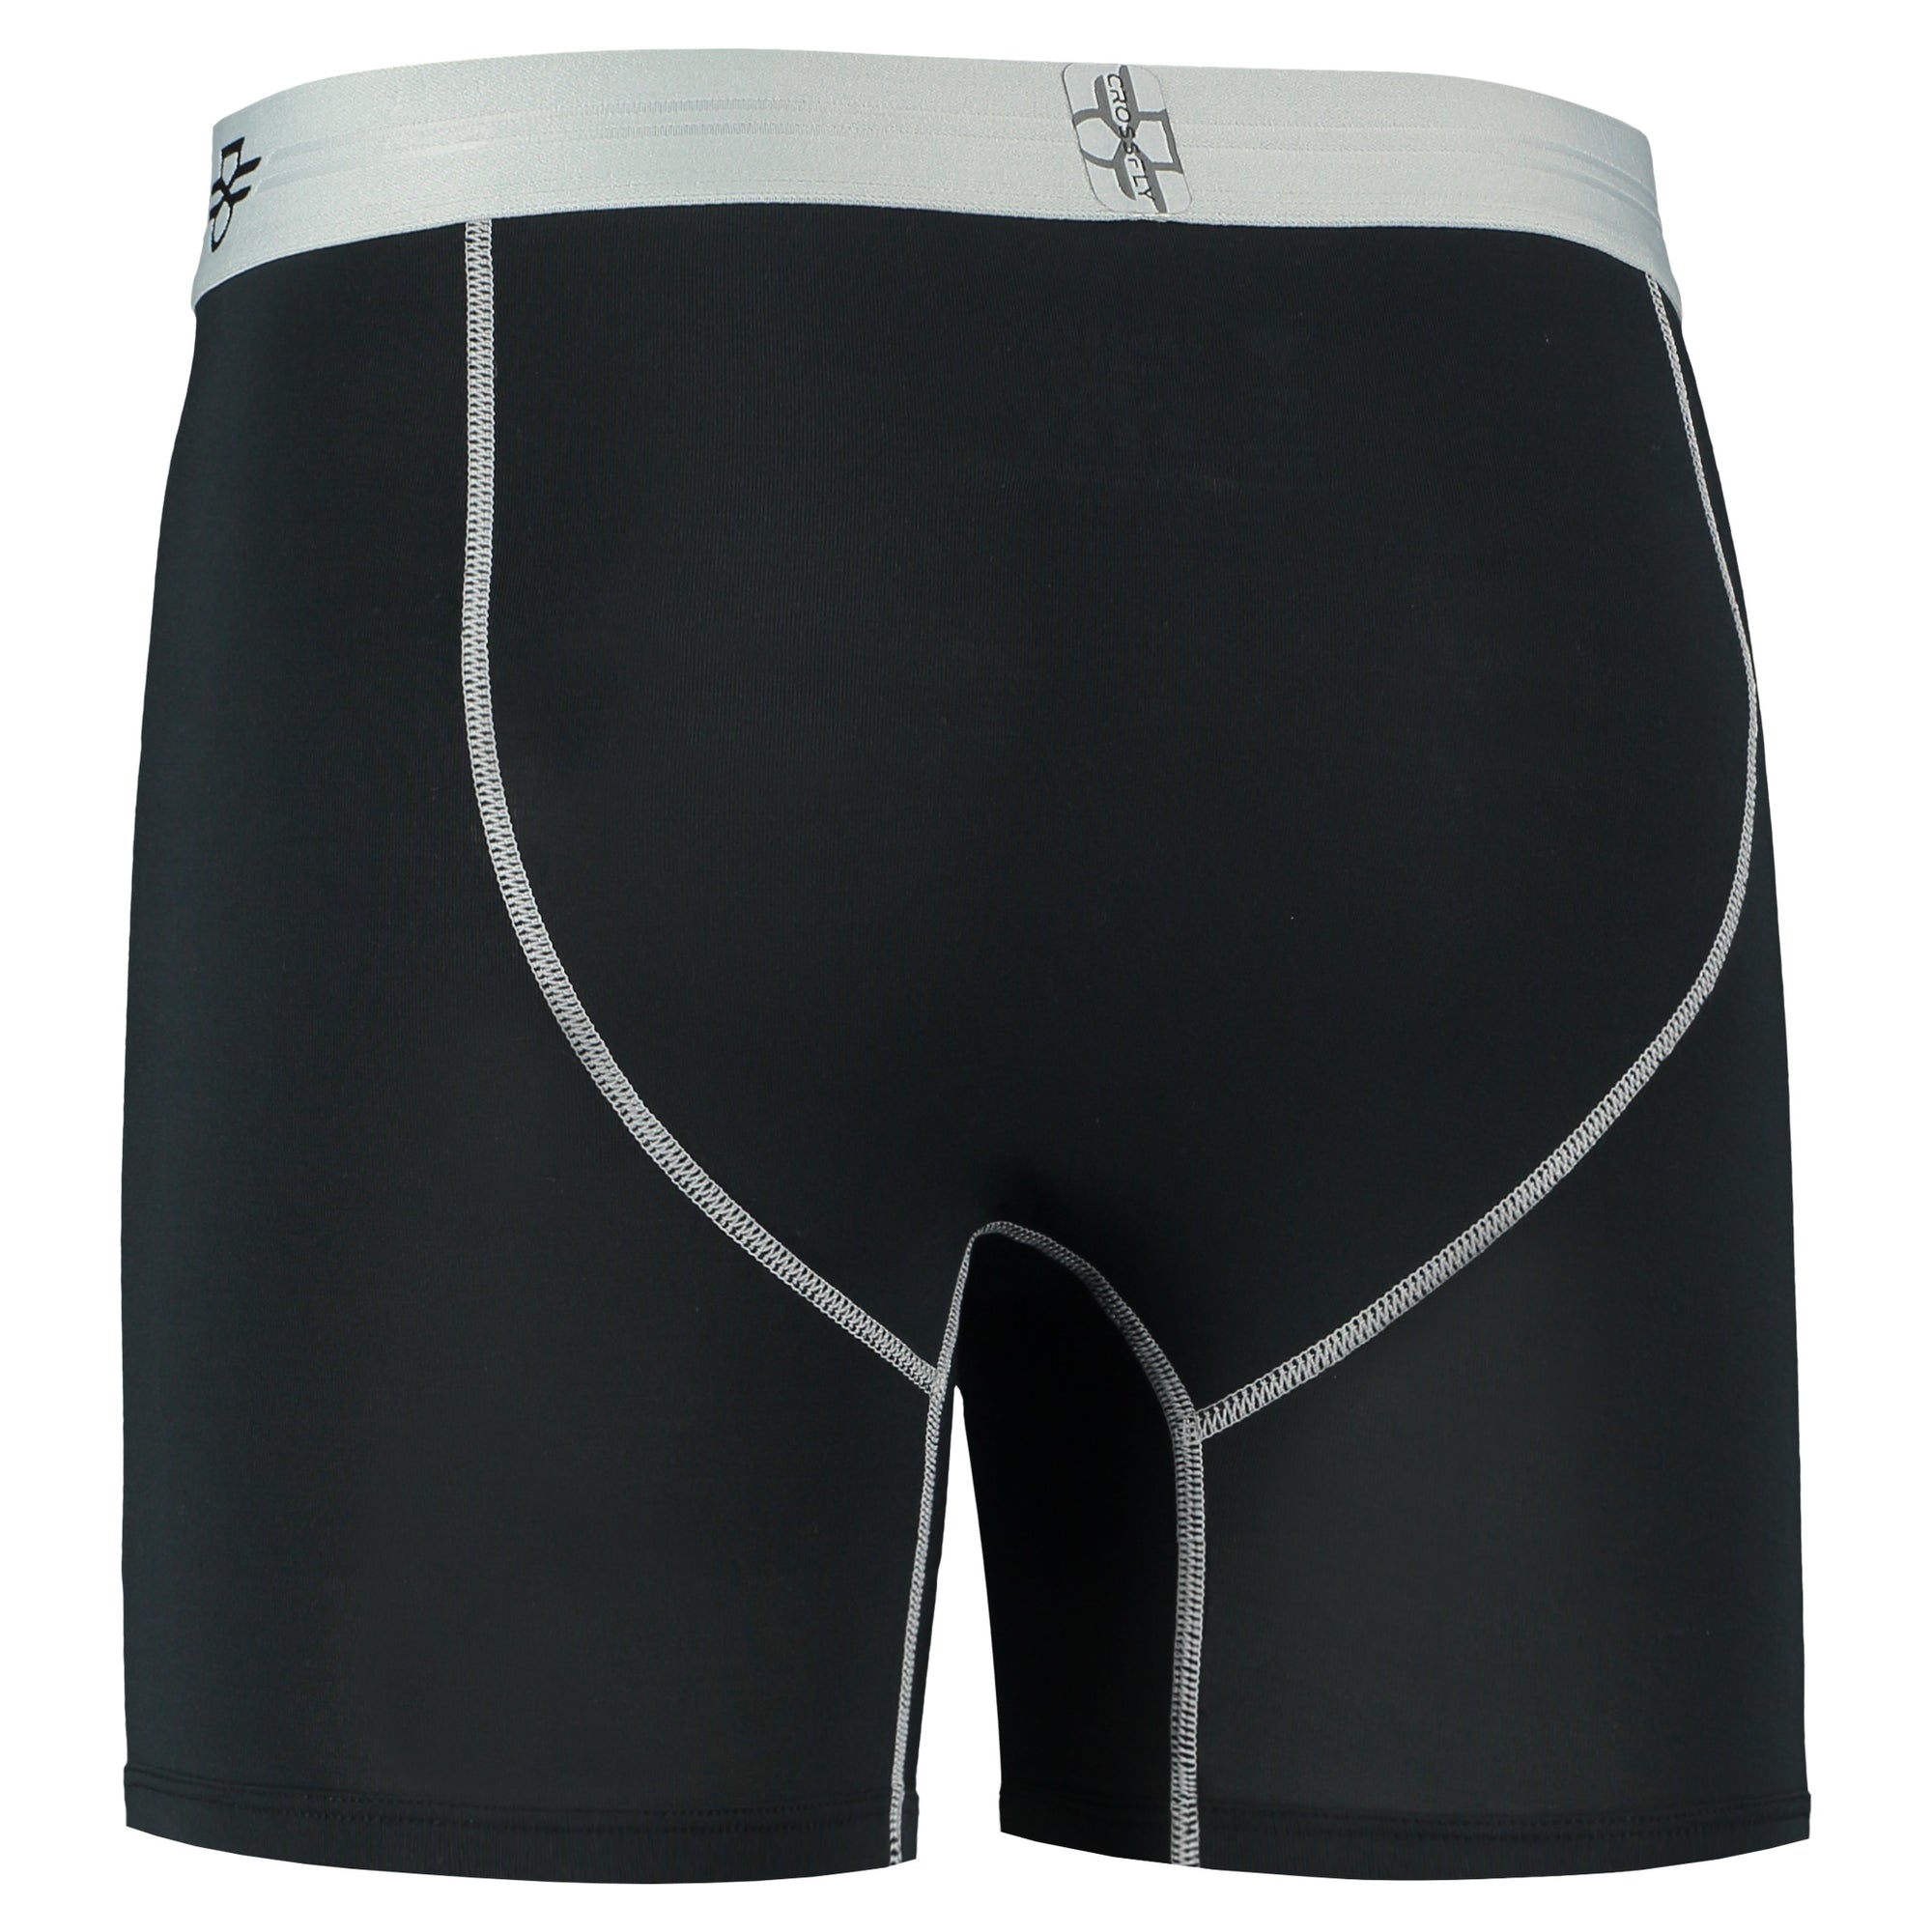 Crossfly men's IKON X 6" black / silver boxers from the Everyday series, featuring X-Fly and Coccoon internal pocket support.